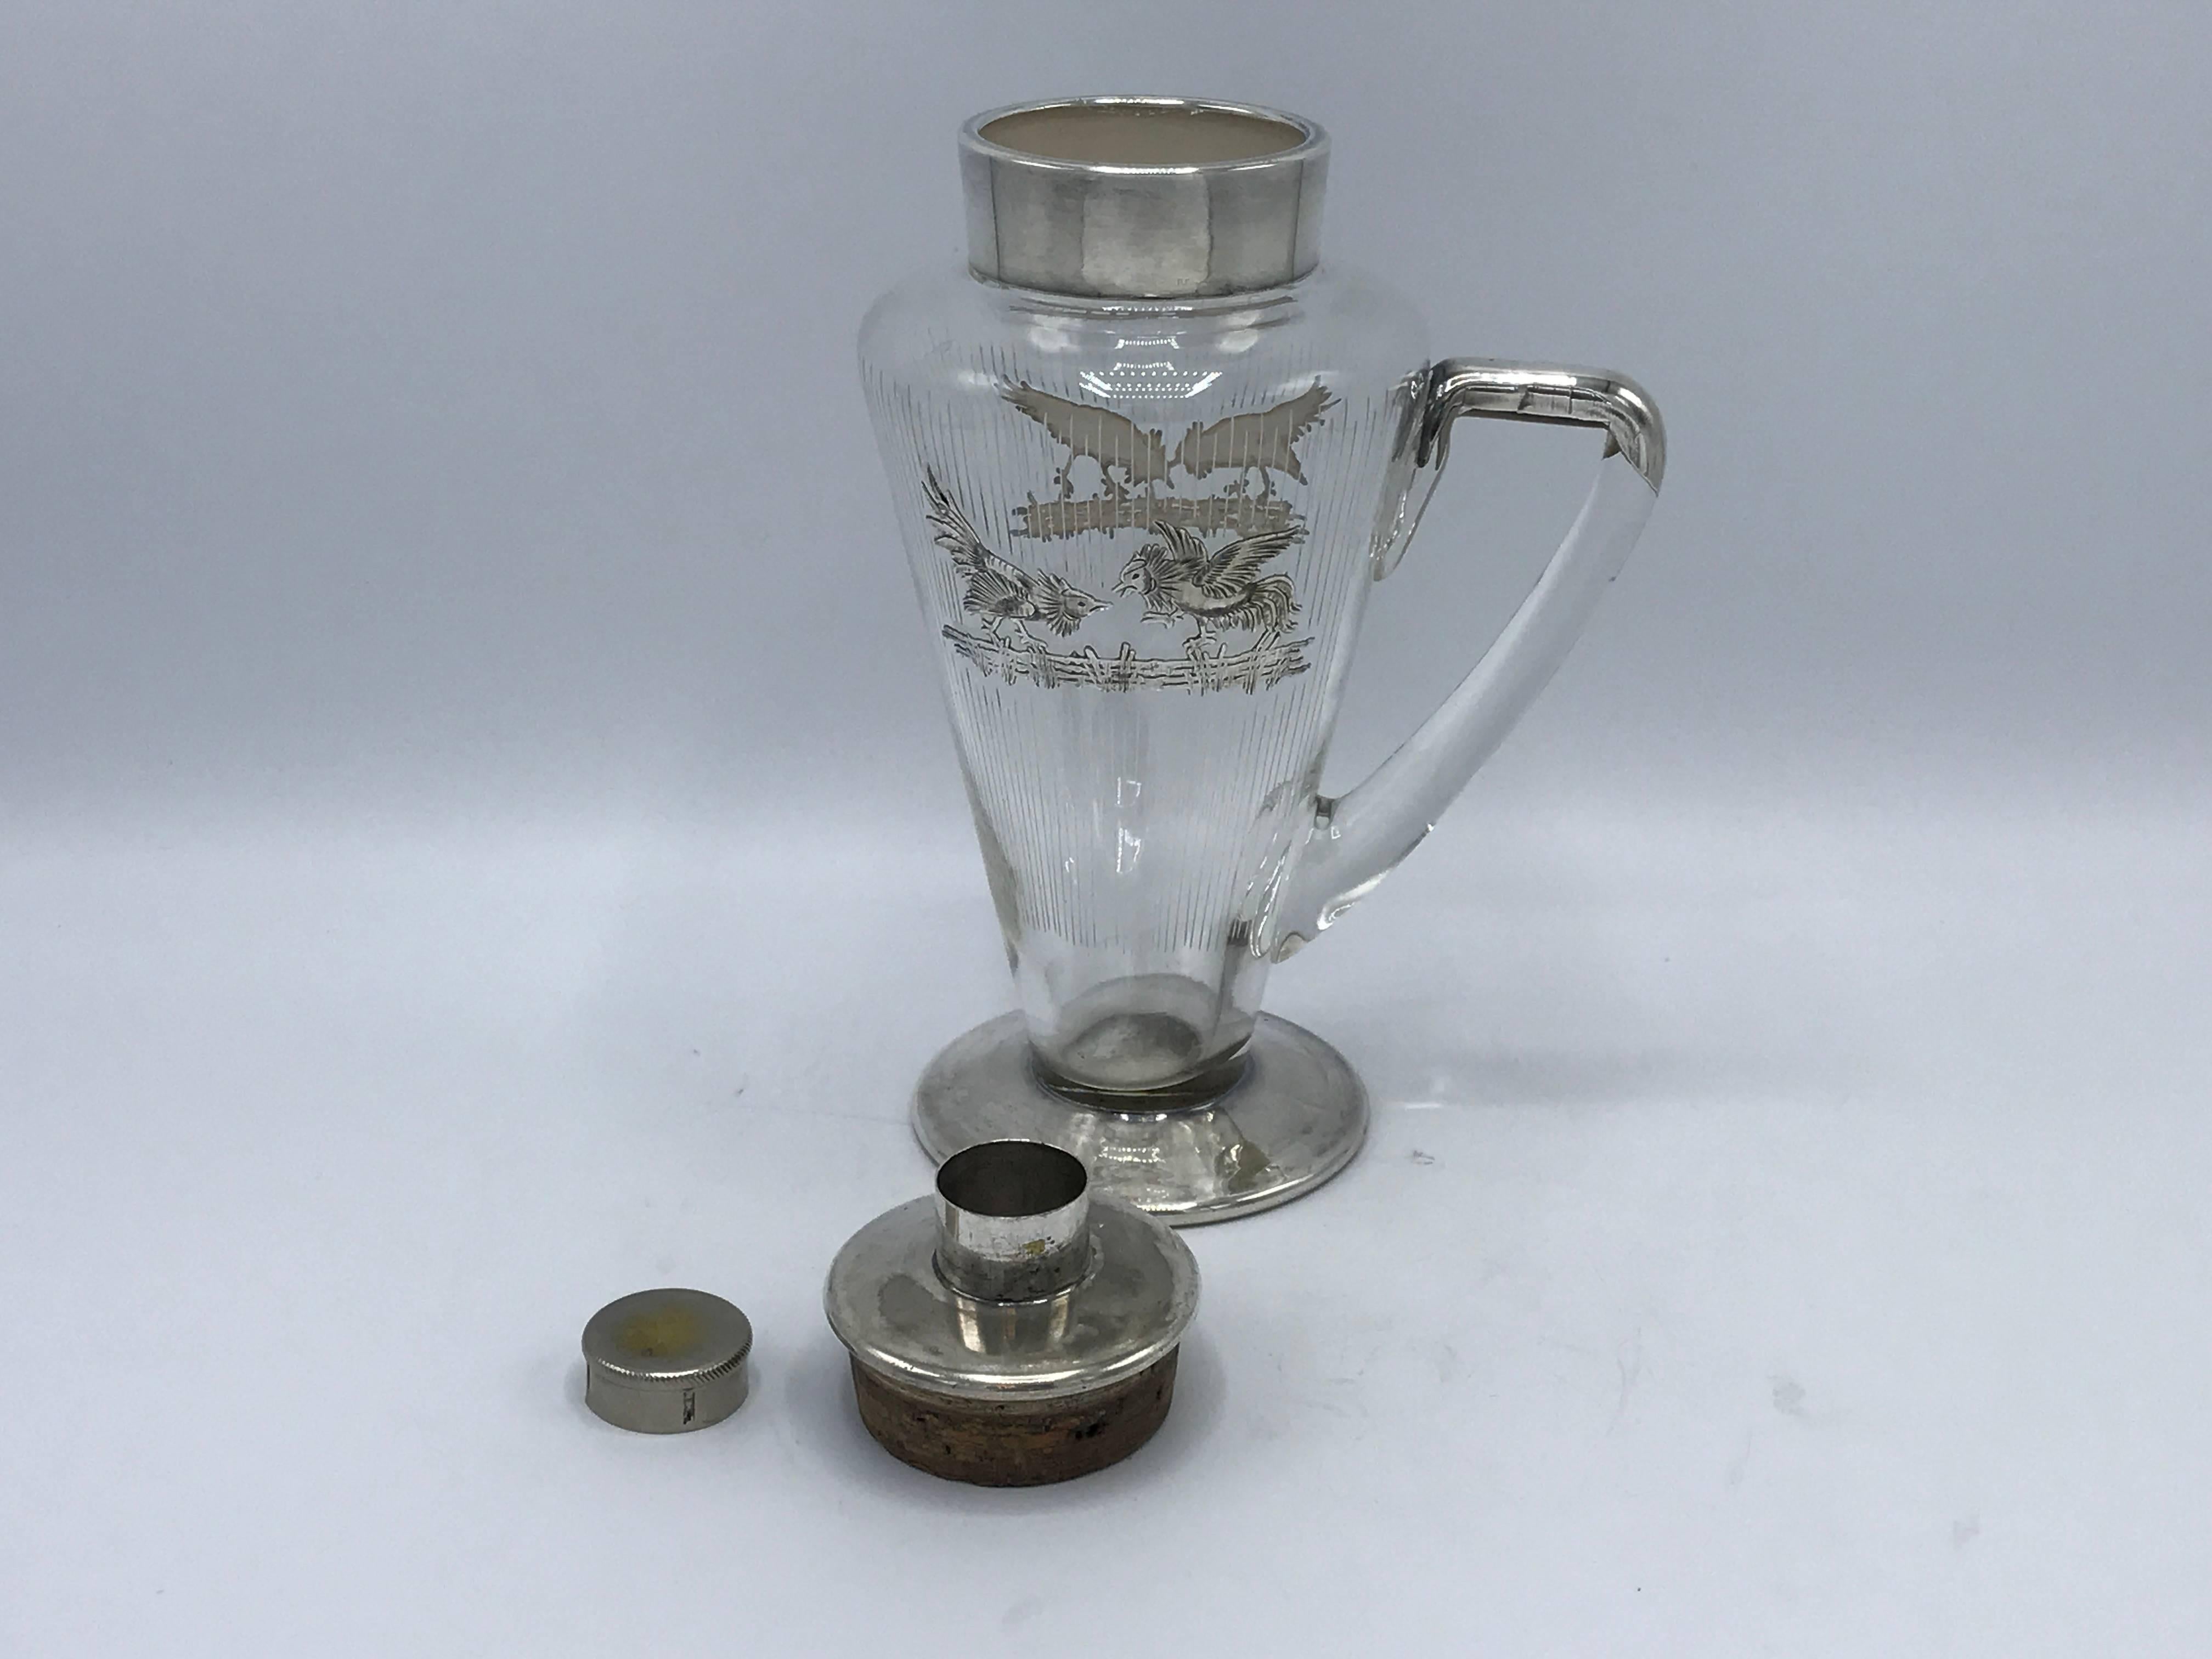 1930s Glass and Sterling Silver Decanter Carafe with Rooster Motif 1